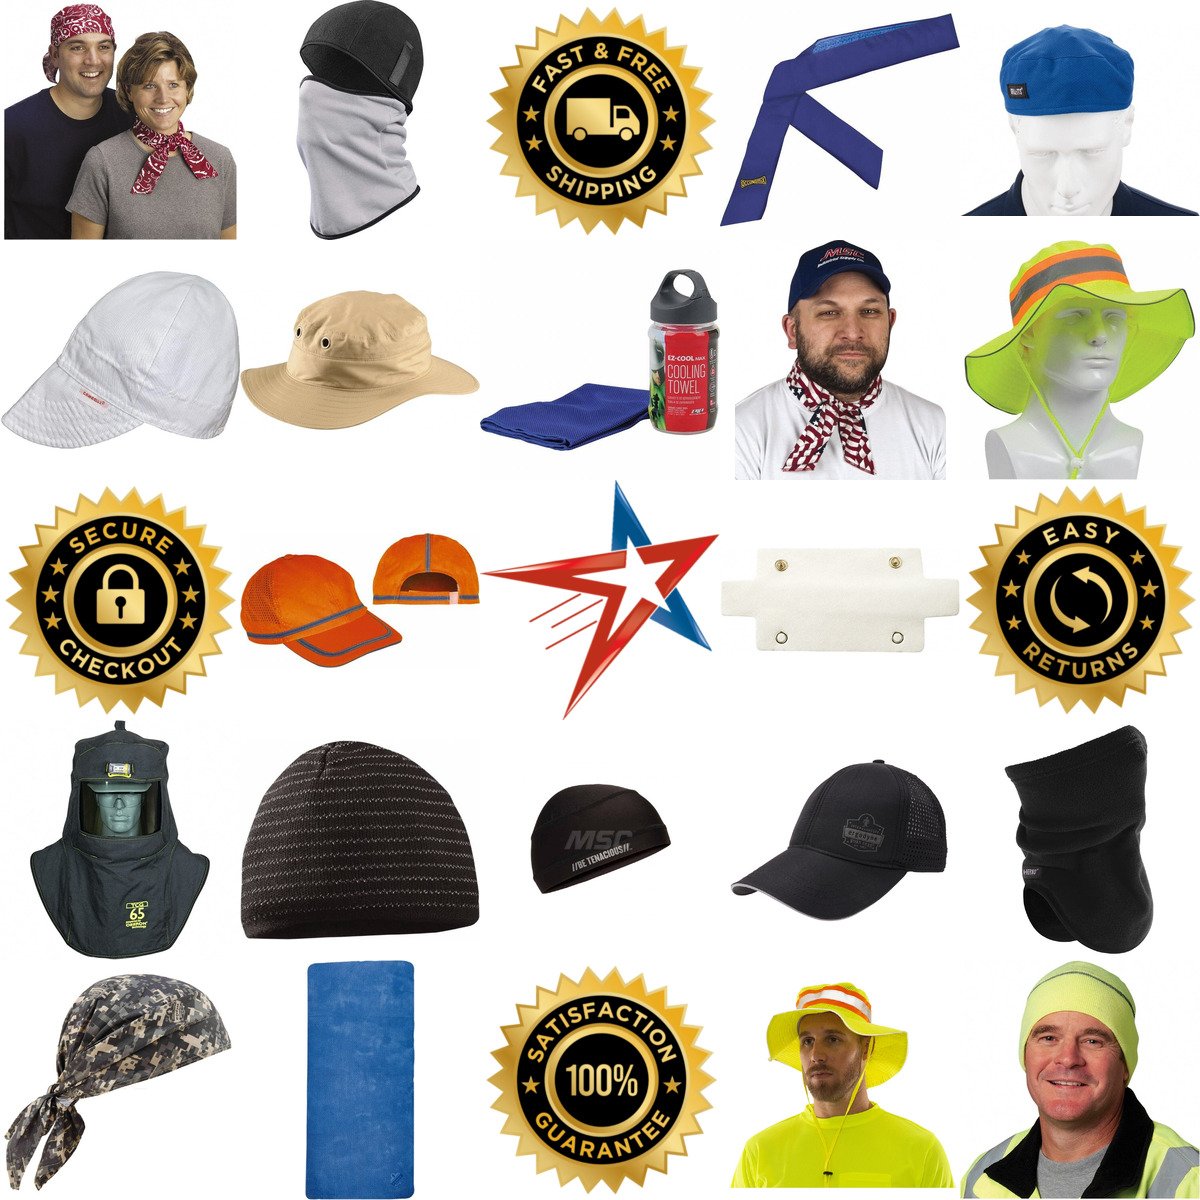 A selection of Head Protection and Hair Coverings products on GoVets